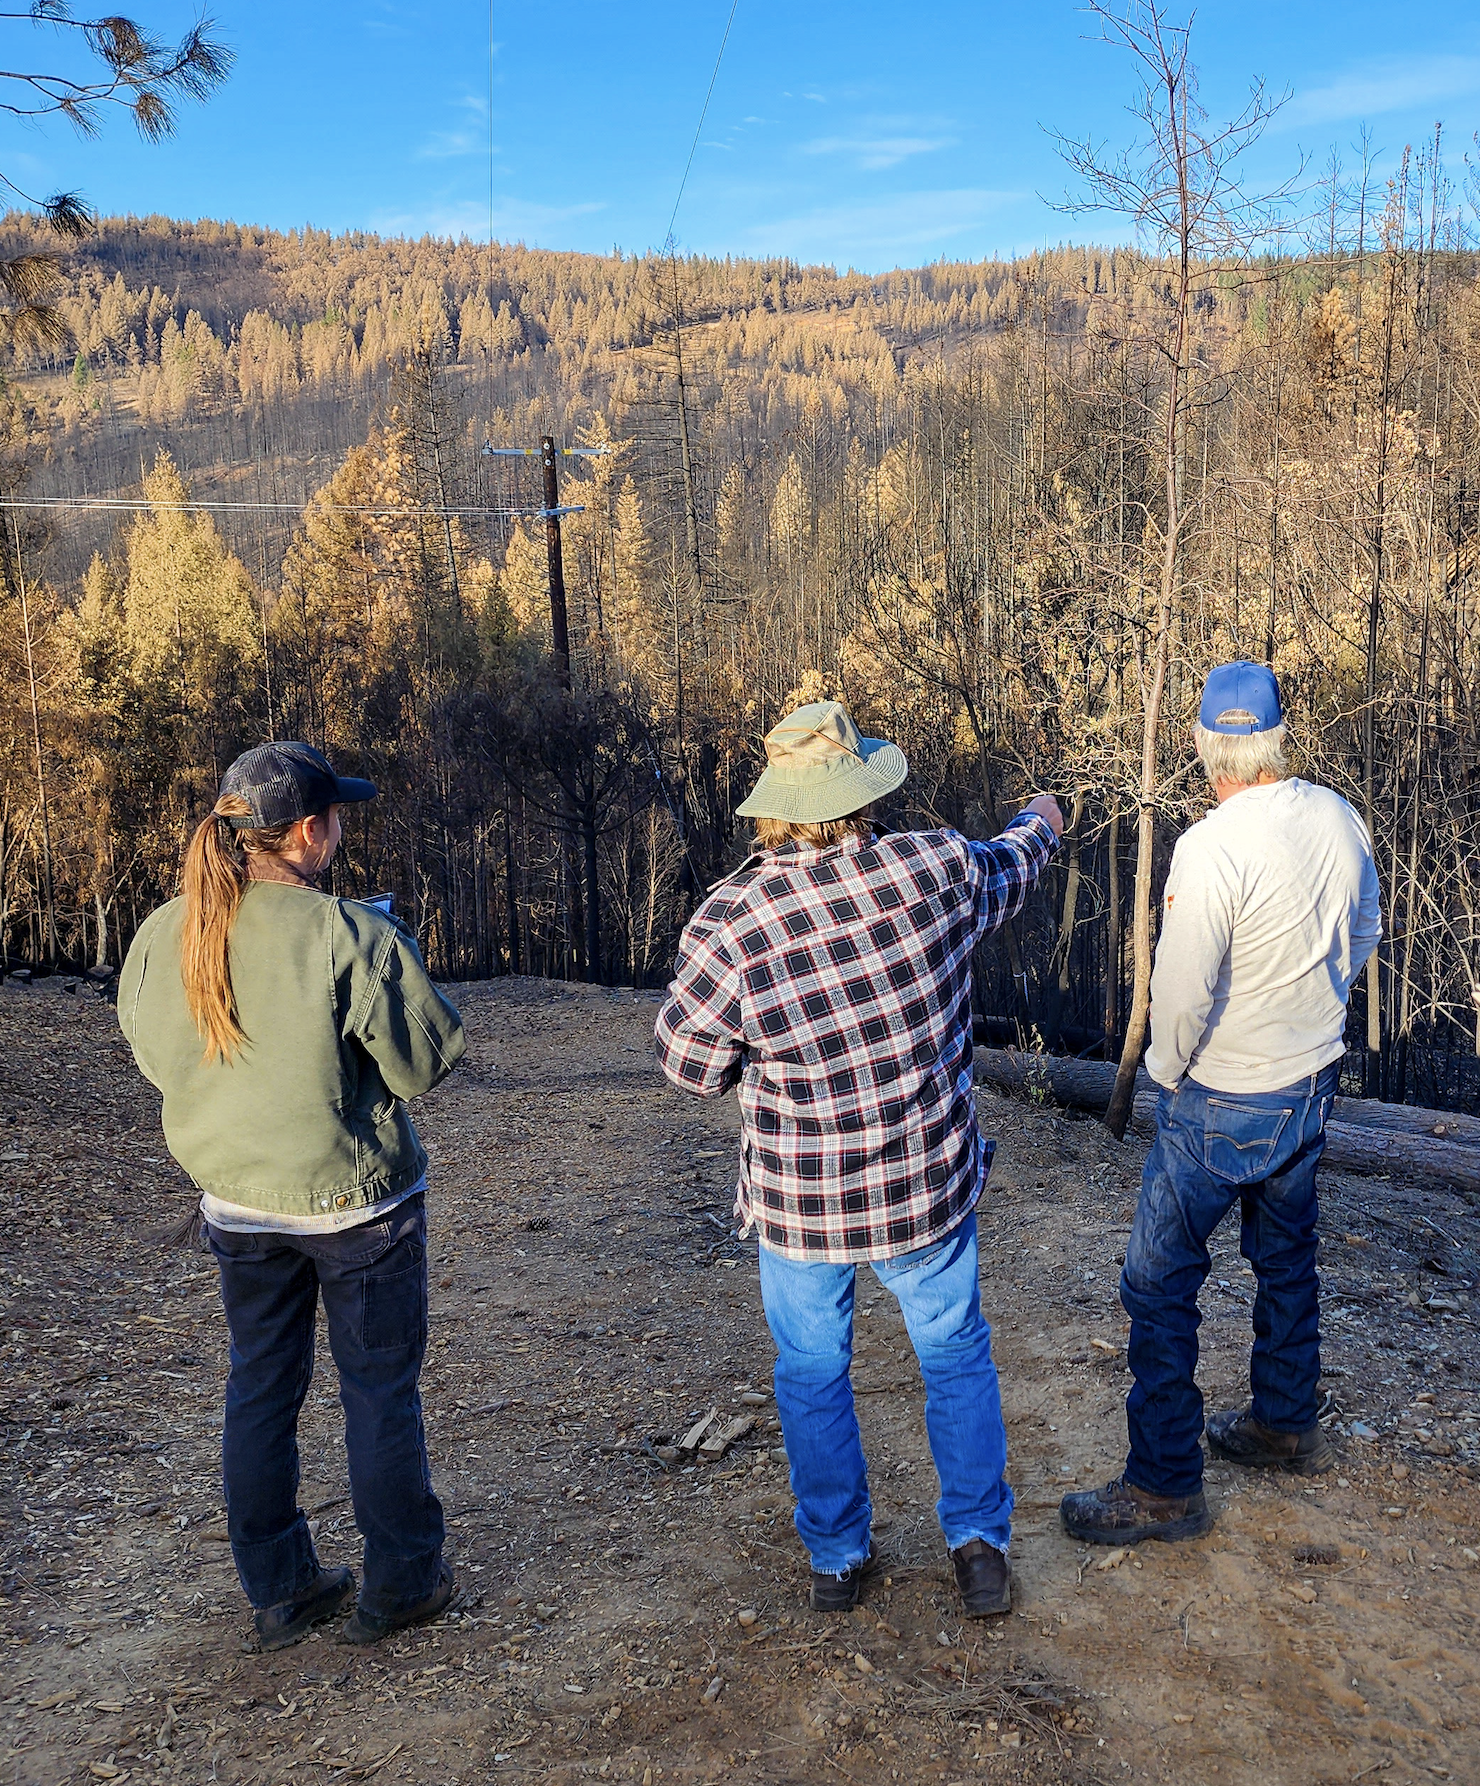 Three people look out over burned forested hillside with blue sky in the background.